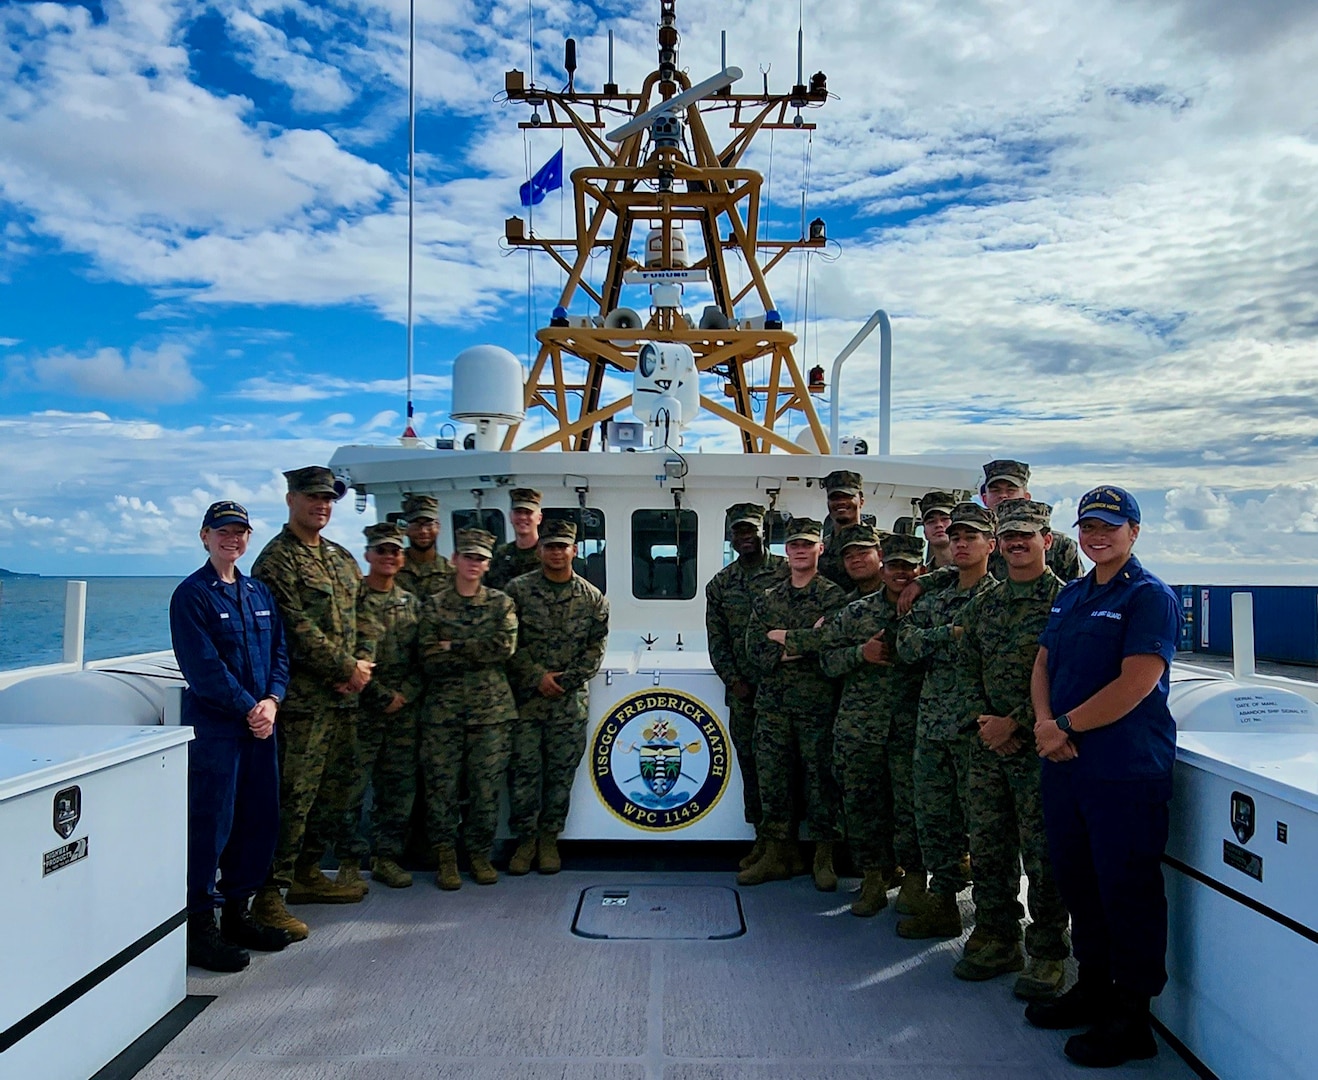 Lt. j.g. Sims and Ensign Salang welcome the Marine Corps Detachment in Chuuk for Operation Koa Moana aboard the USCGC Frederick Hatch (WPC 1143) for a tour while visiting Chuuk, Federated States of Micronesia, on July 28, 2023. The crew conducted a patrol in FSM in support of Operation Rematau. (U.S. Coast Guard photo)